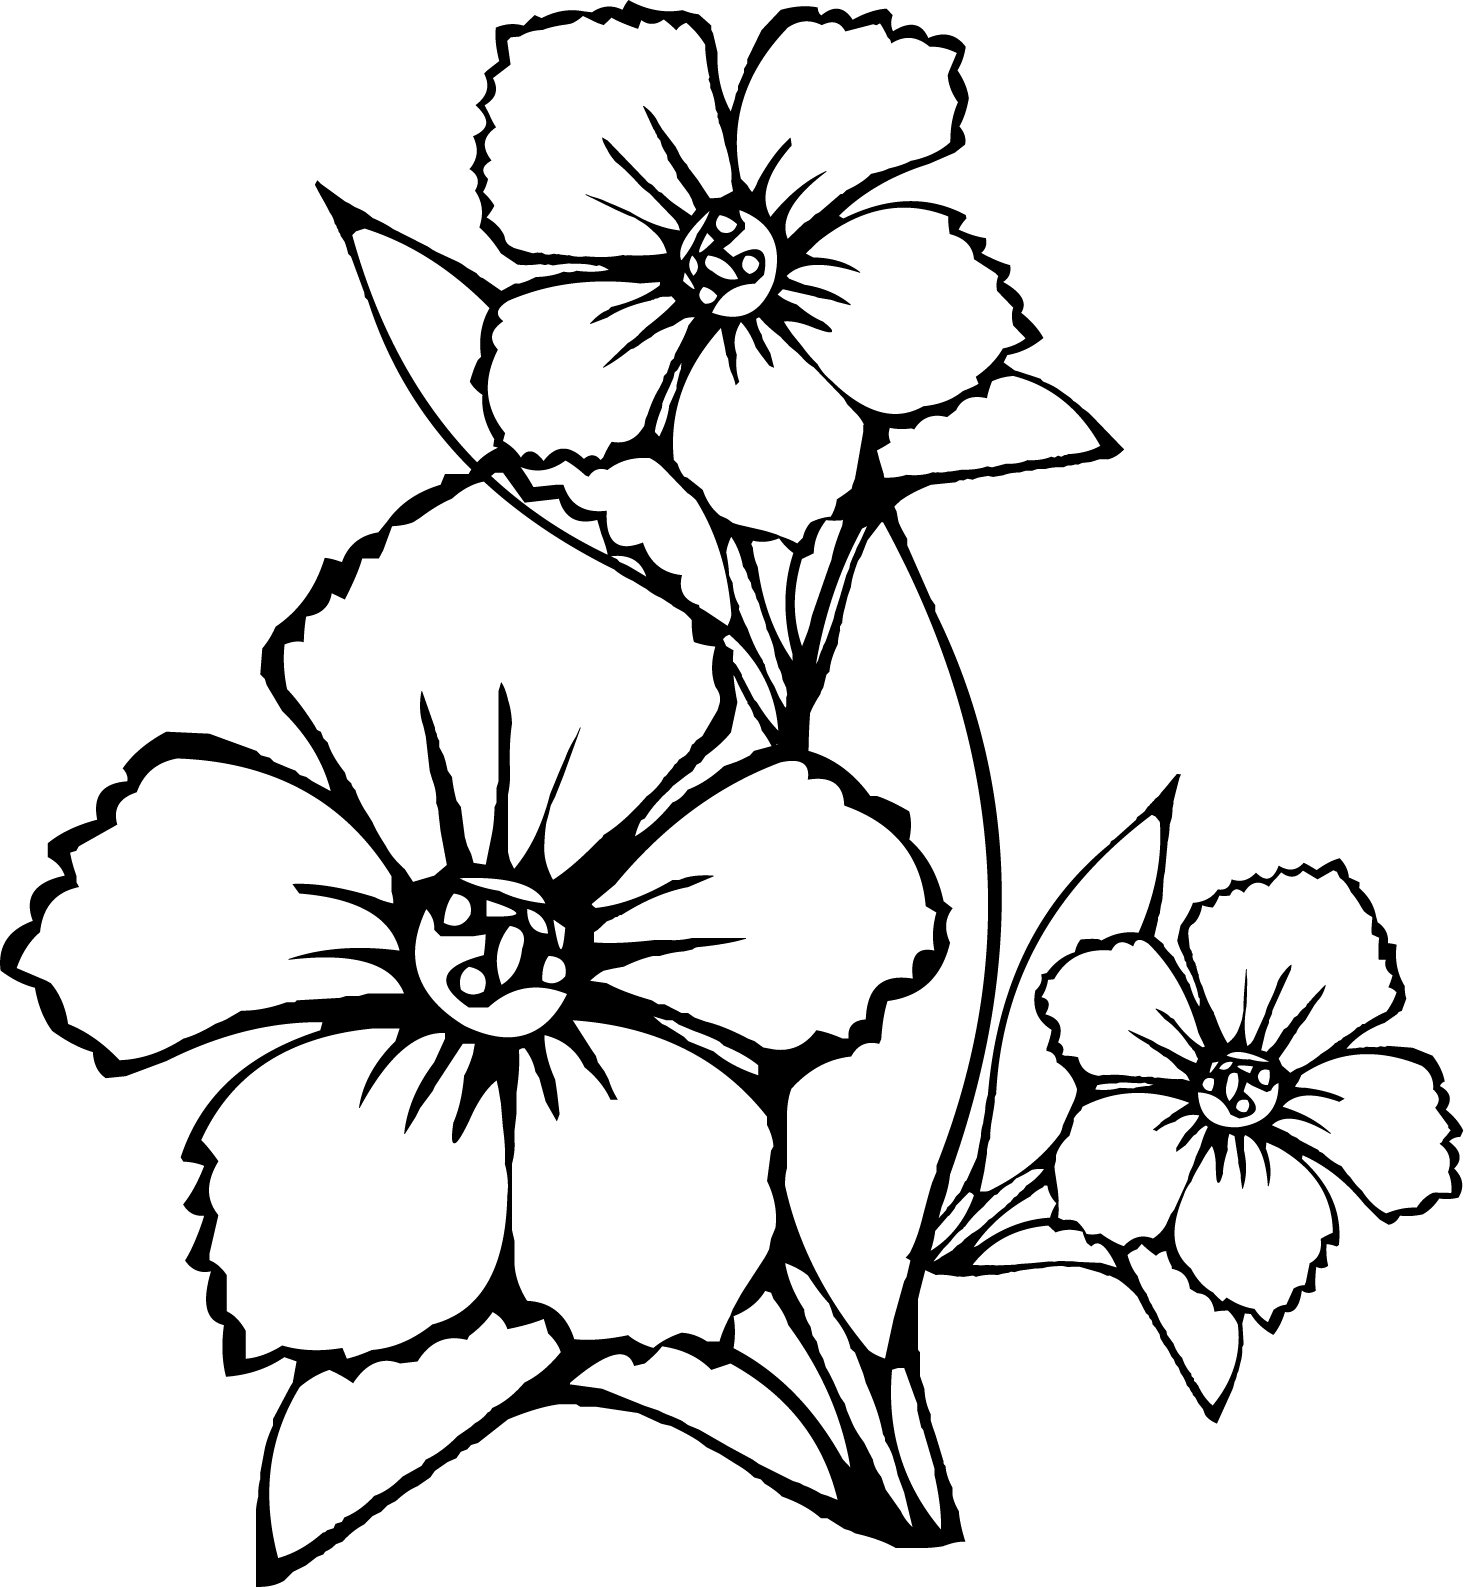 341 Cute Basic Flower Coloring Pages for Kindergarten